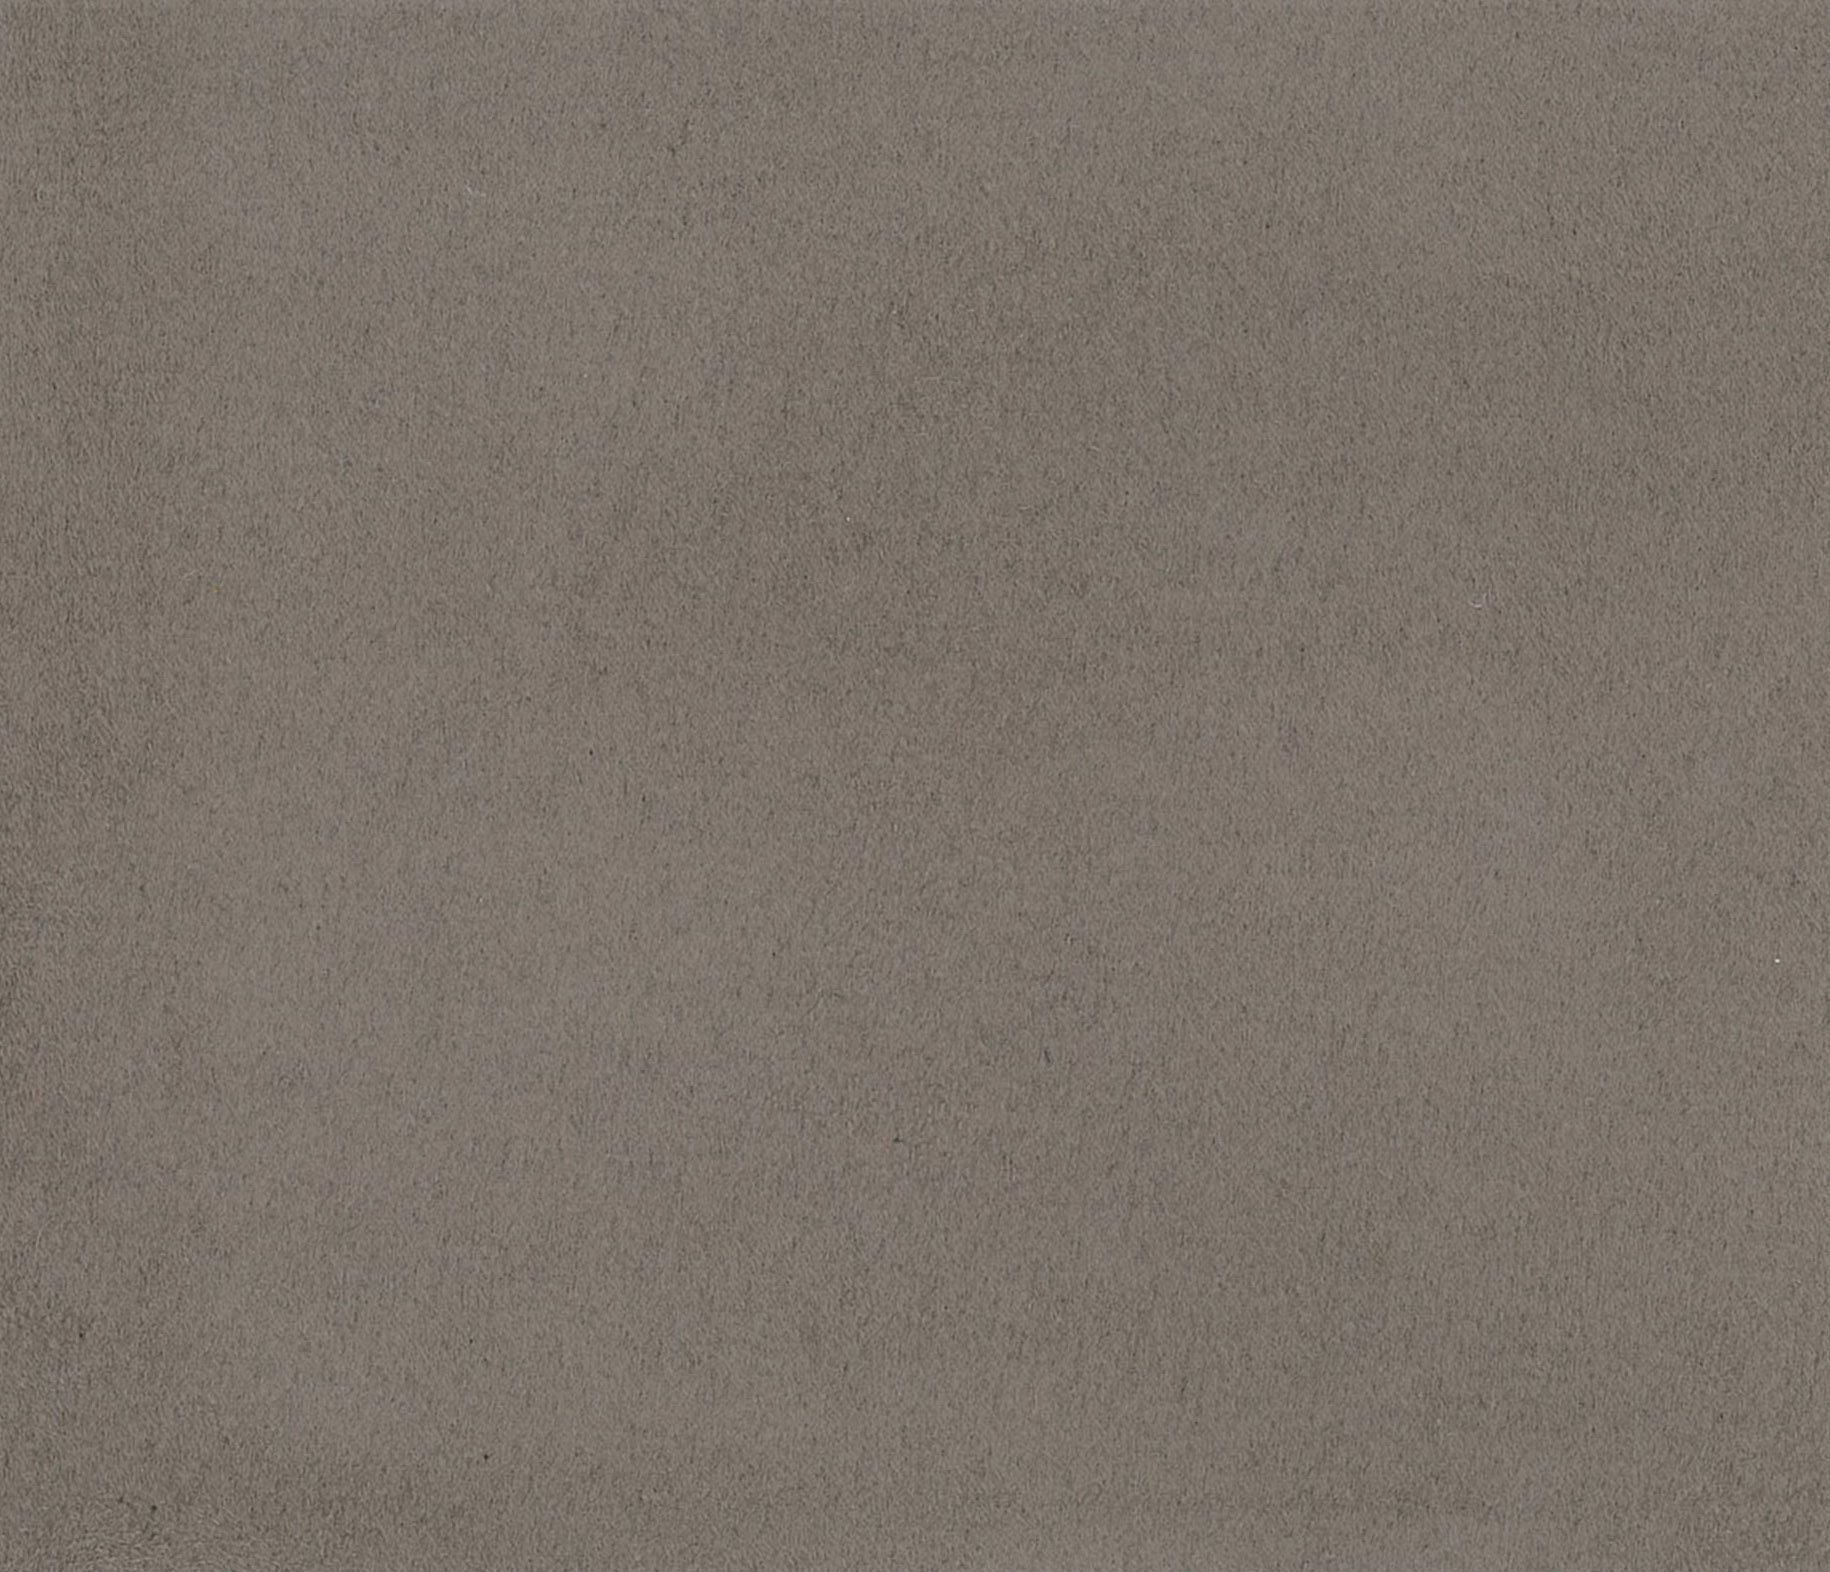 Sarabelle Suede fabric in taupe color - pattern number H6 0003SARA - by Scalamandre in the Old World Weavers collection